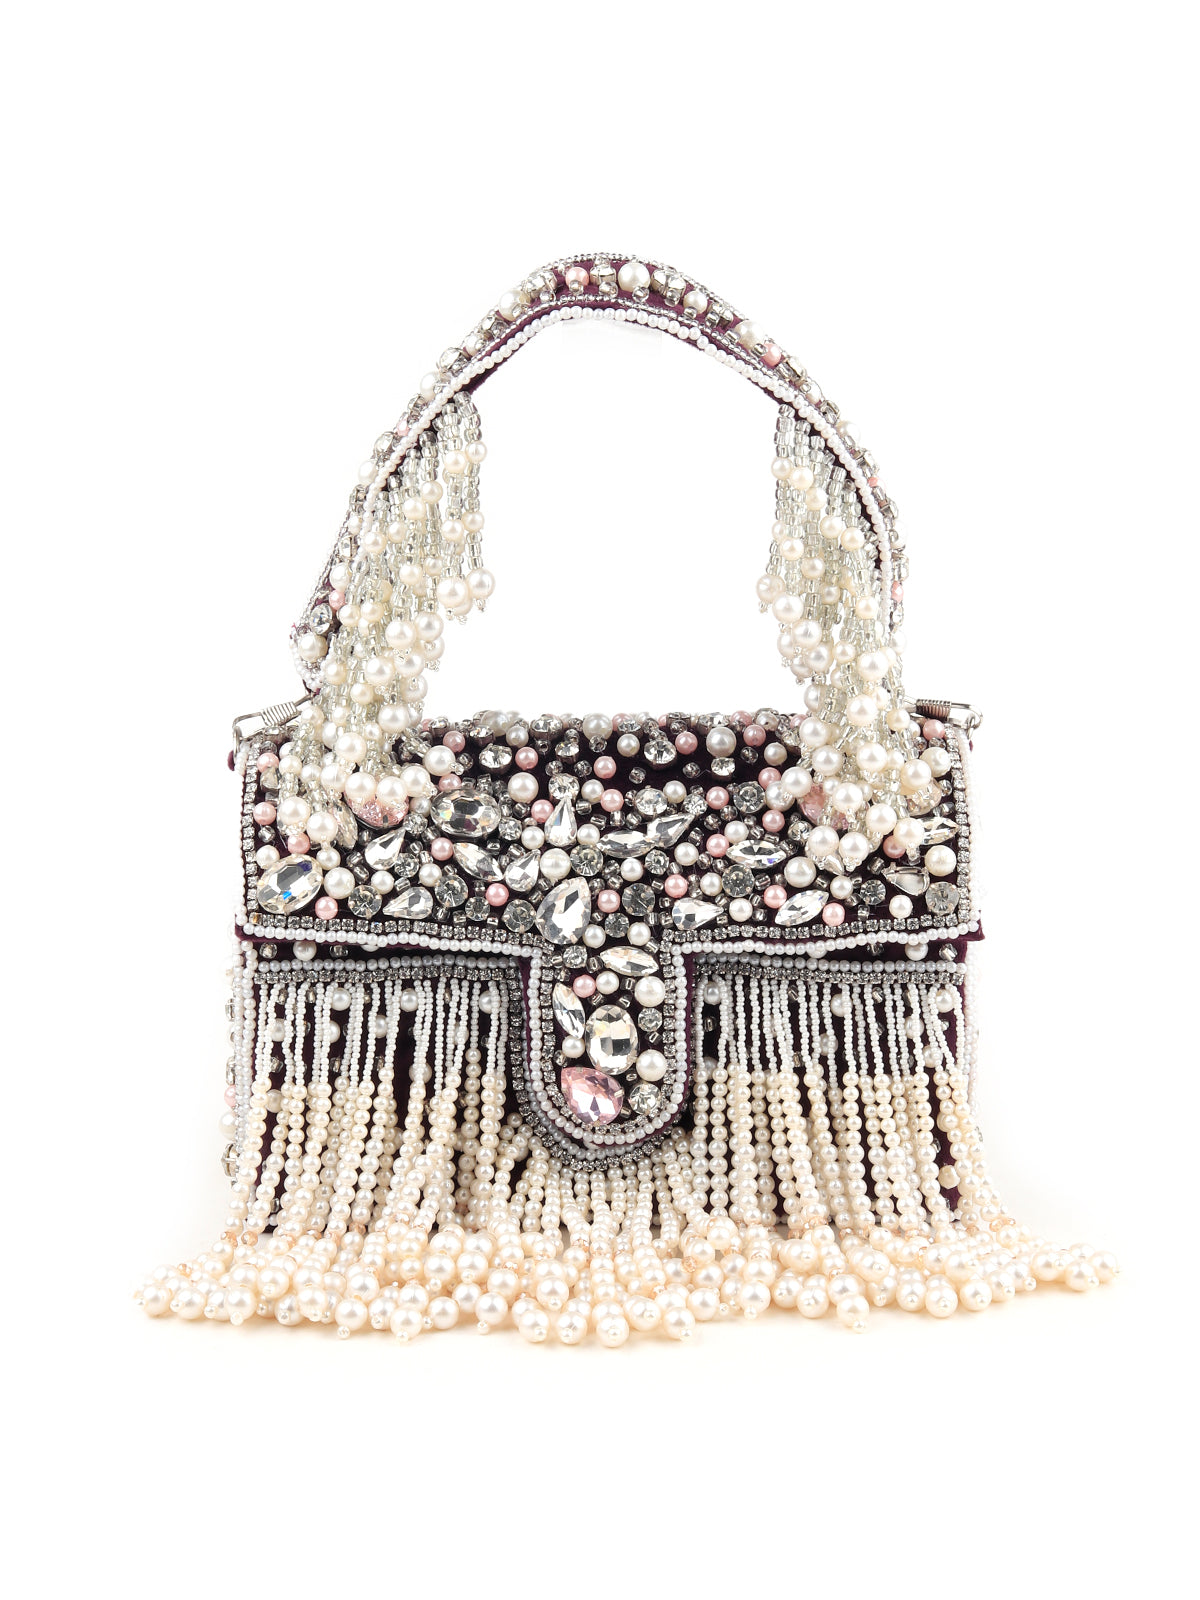 Violet Beaded Clutch Bag With Tassels